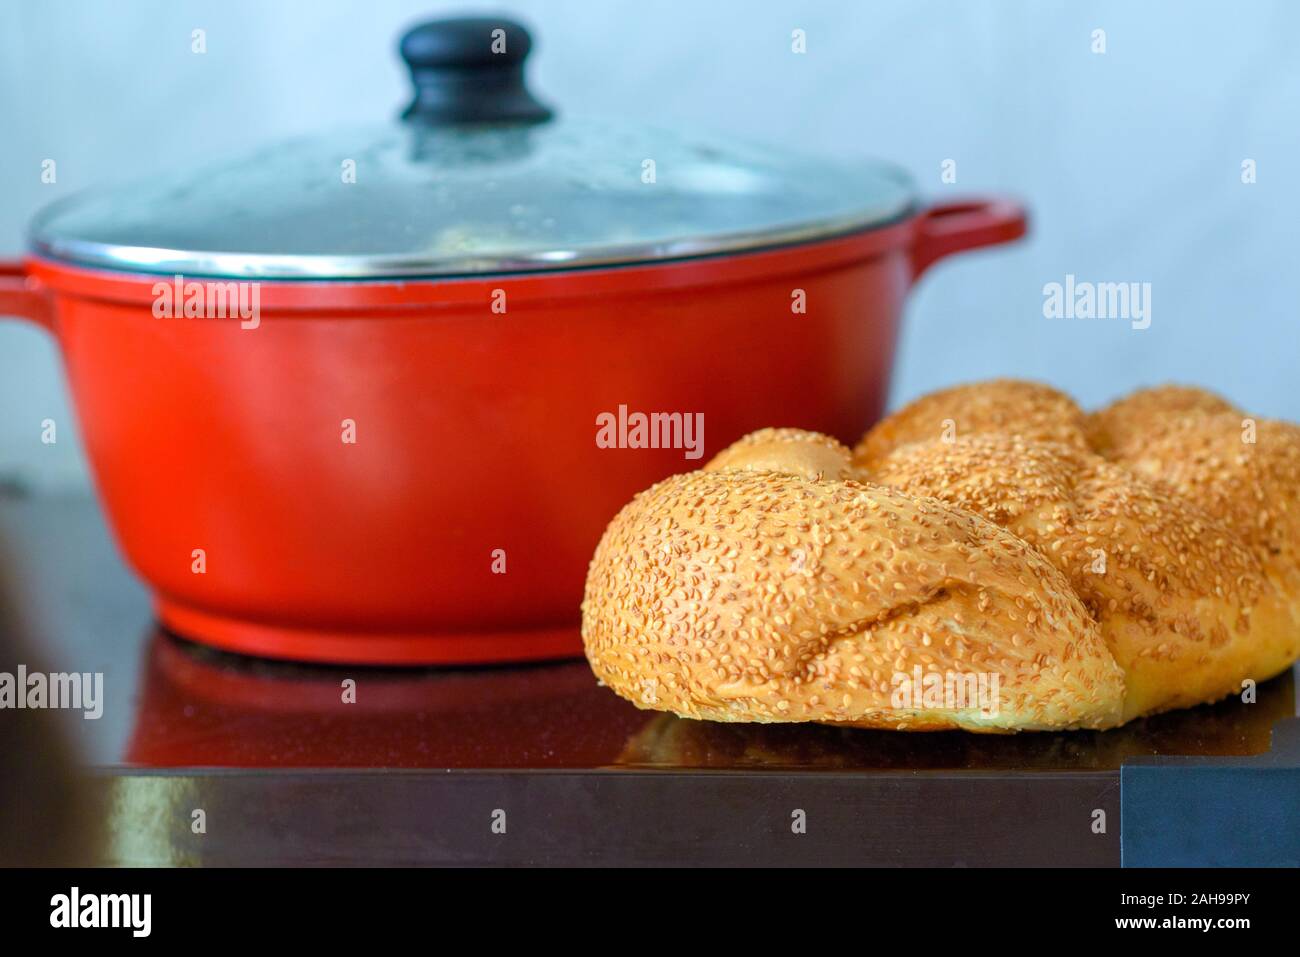 https://c8.alamy.com/comp/2AH99PY/hot-plate-for-the-sabbath-pot-with-traditional-food-and-challah-special-bread-in-jewish-cuisine-traditional-food-jewish-shabbat-2AH99PY.jpg